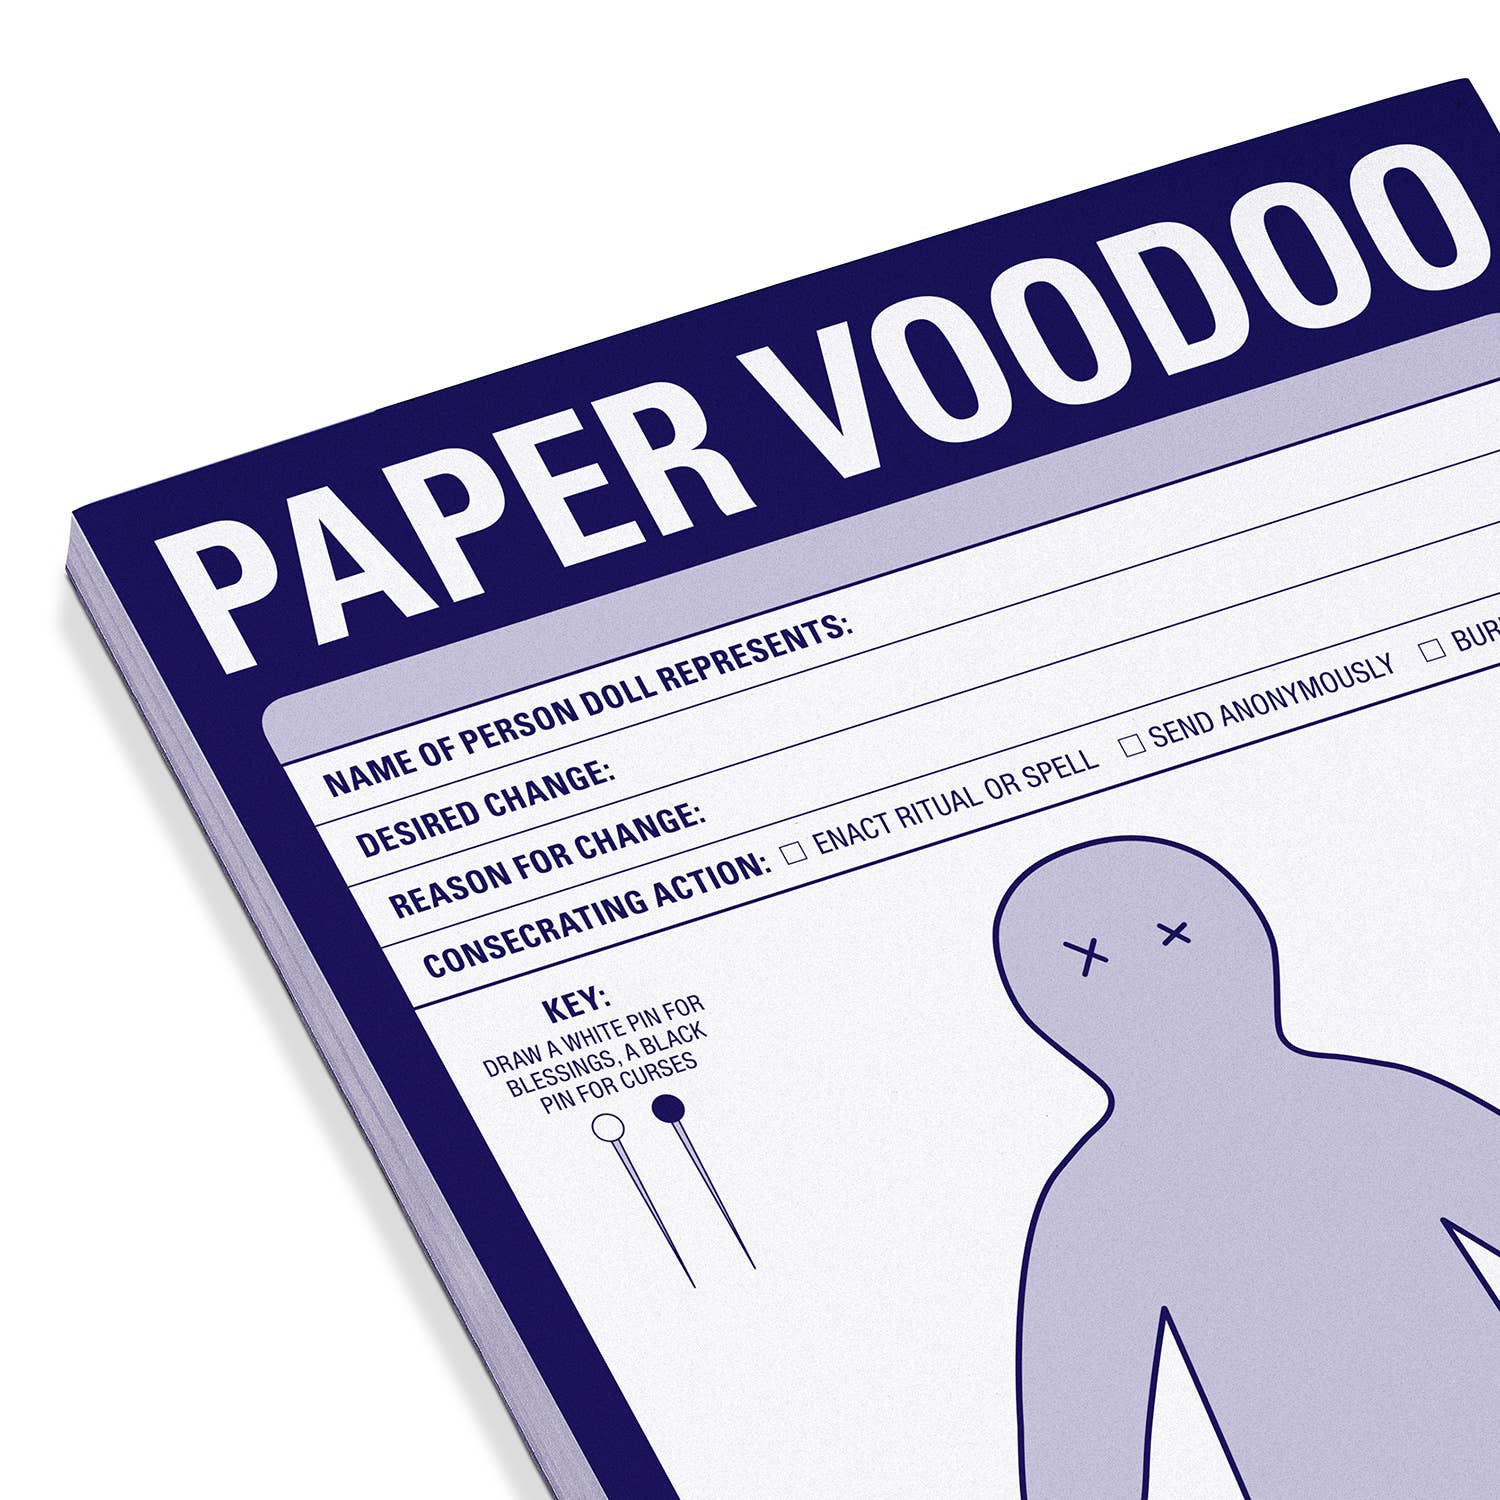 Paper Voodoo Pad-Office Supplies > General Office Supplies > Paper Products > Notebooks & Notepads-Quinn's Mercantile